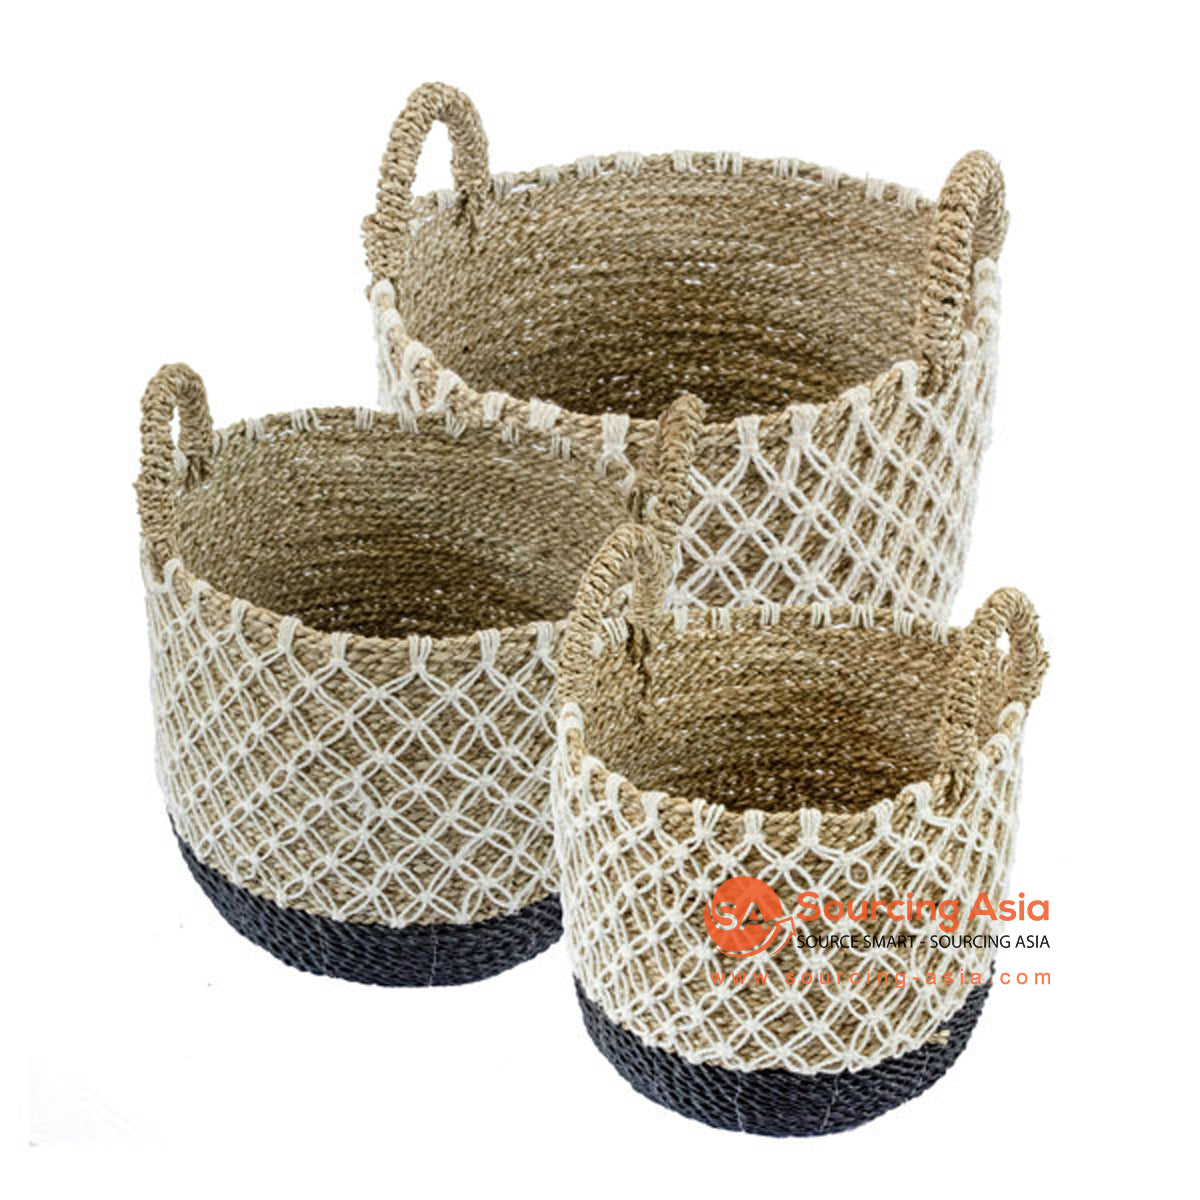 SHL168-9 SET OF THREE NATURAL AND BLACK SEAGRASS BASKETS WITH MACRAME